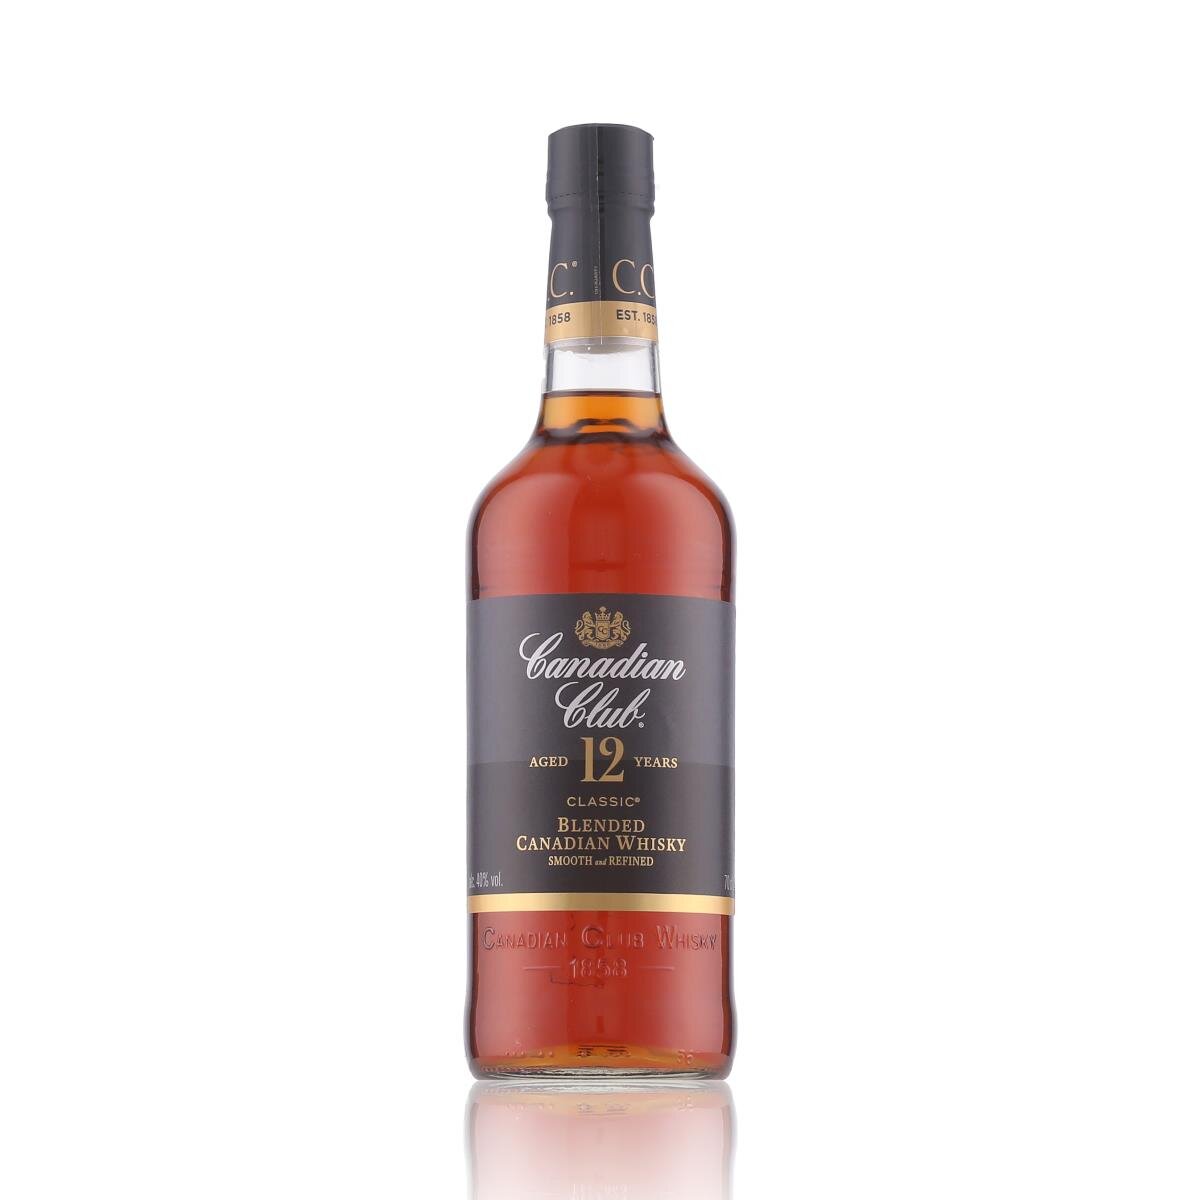 Canadian Club 12 Years Blended Canadian 40% Whisky € Vol. 0,7l, 23,89